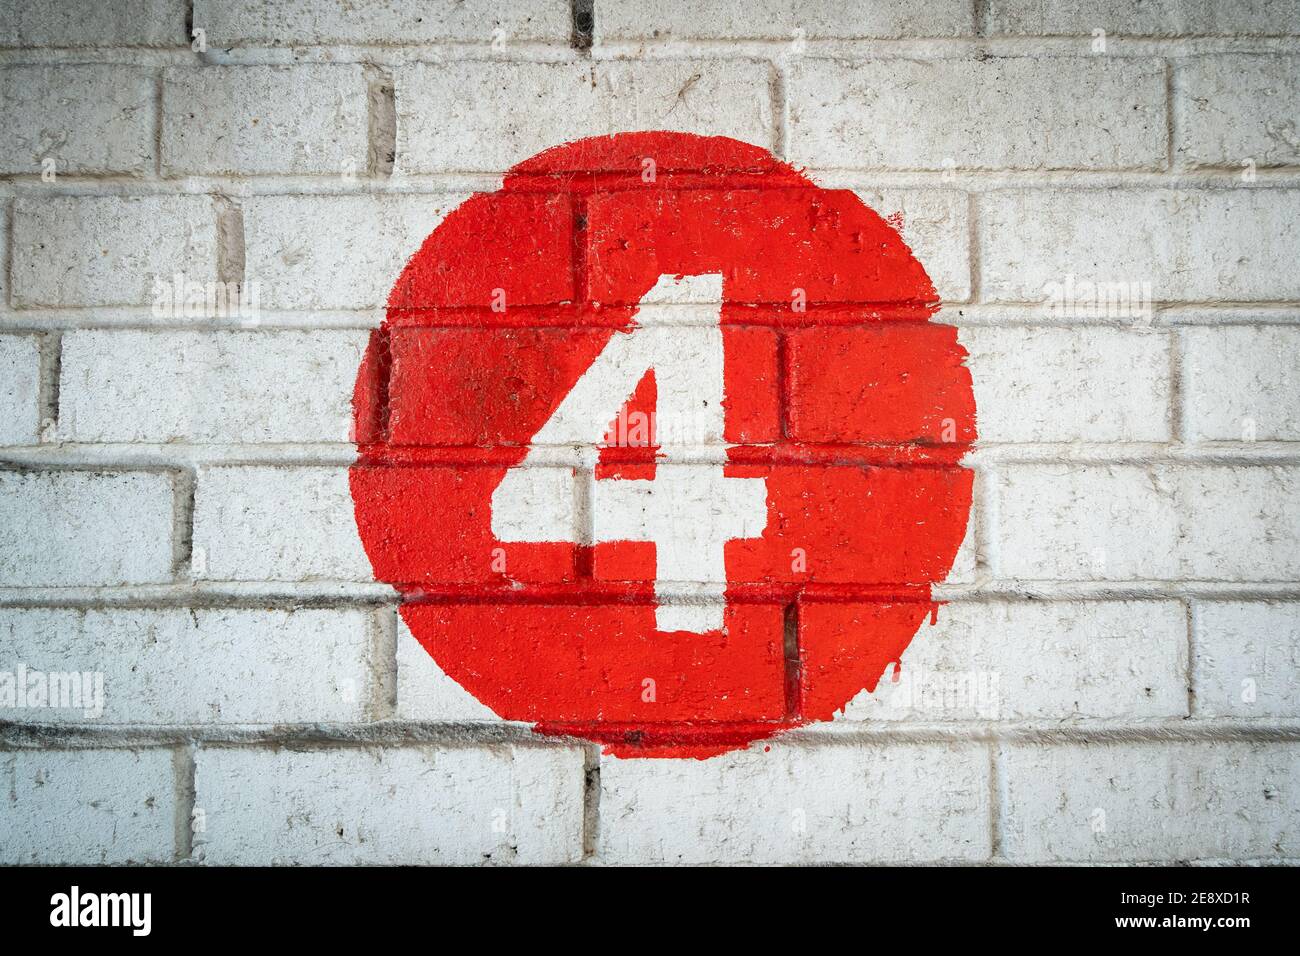 White coloured hand painted level number four in the middle of a red circle painted on an old textured brick wall with runs in the colour Stock Photo